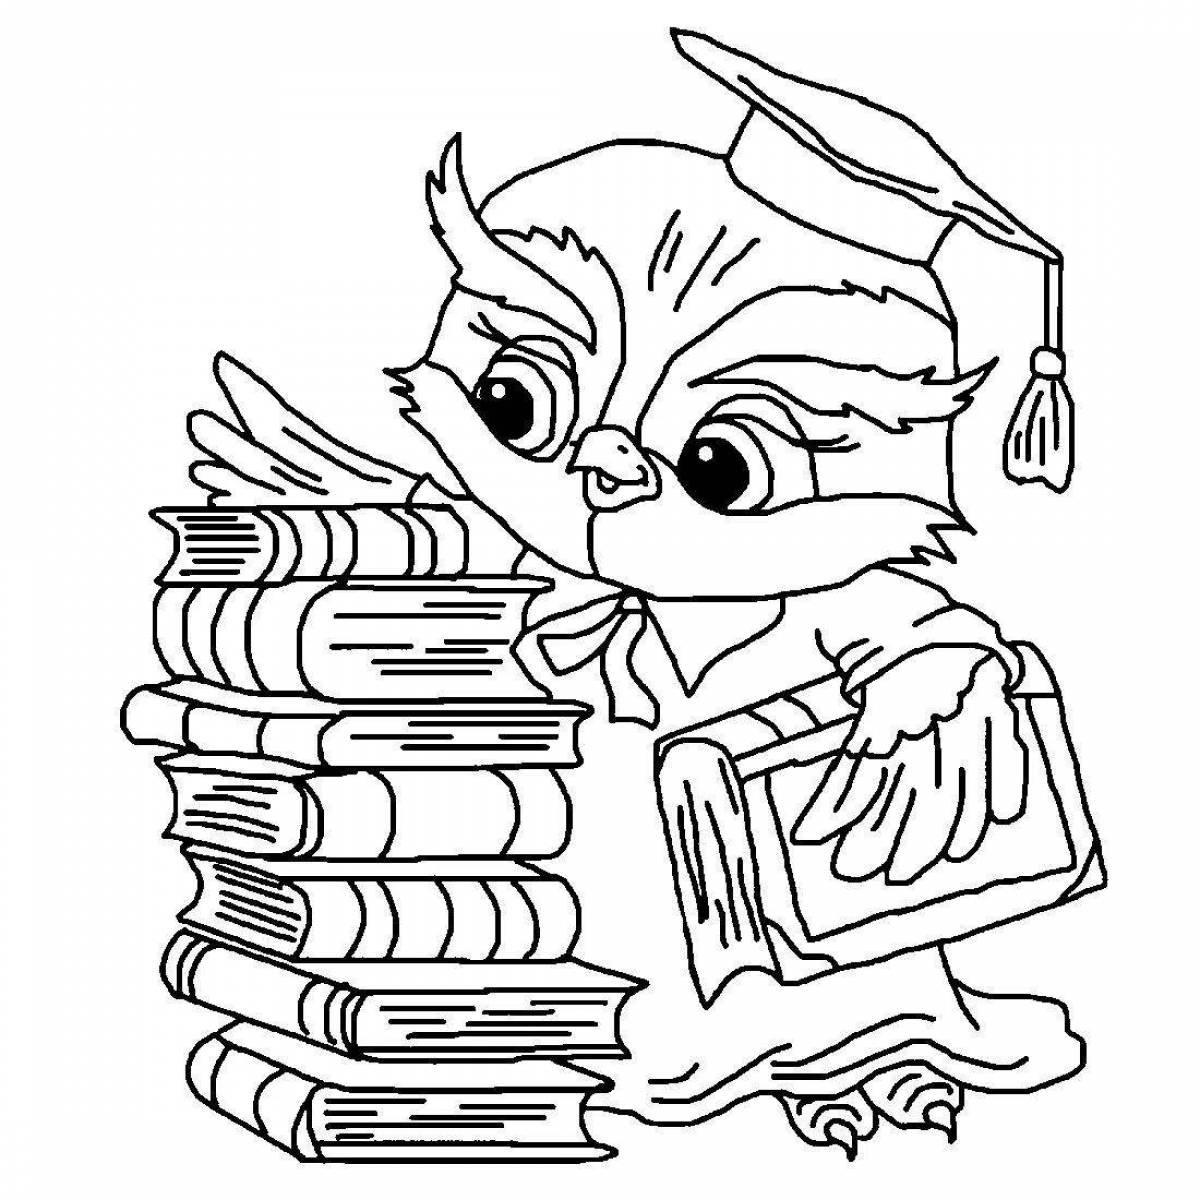 Coloring book wise owl with big eyes